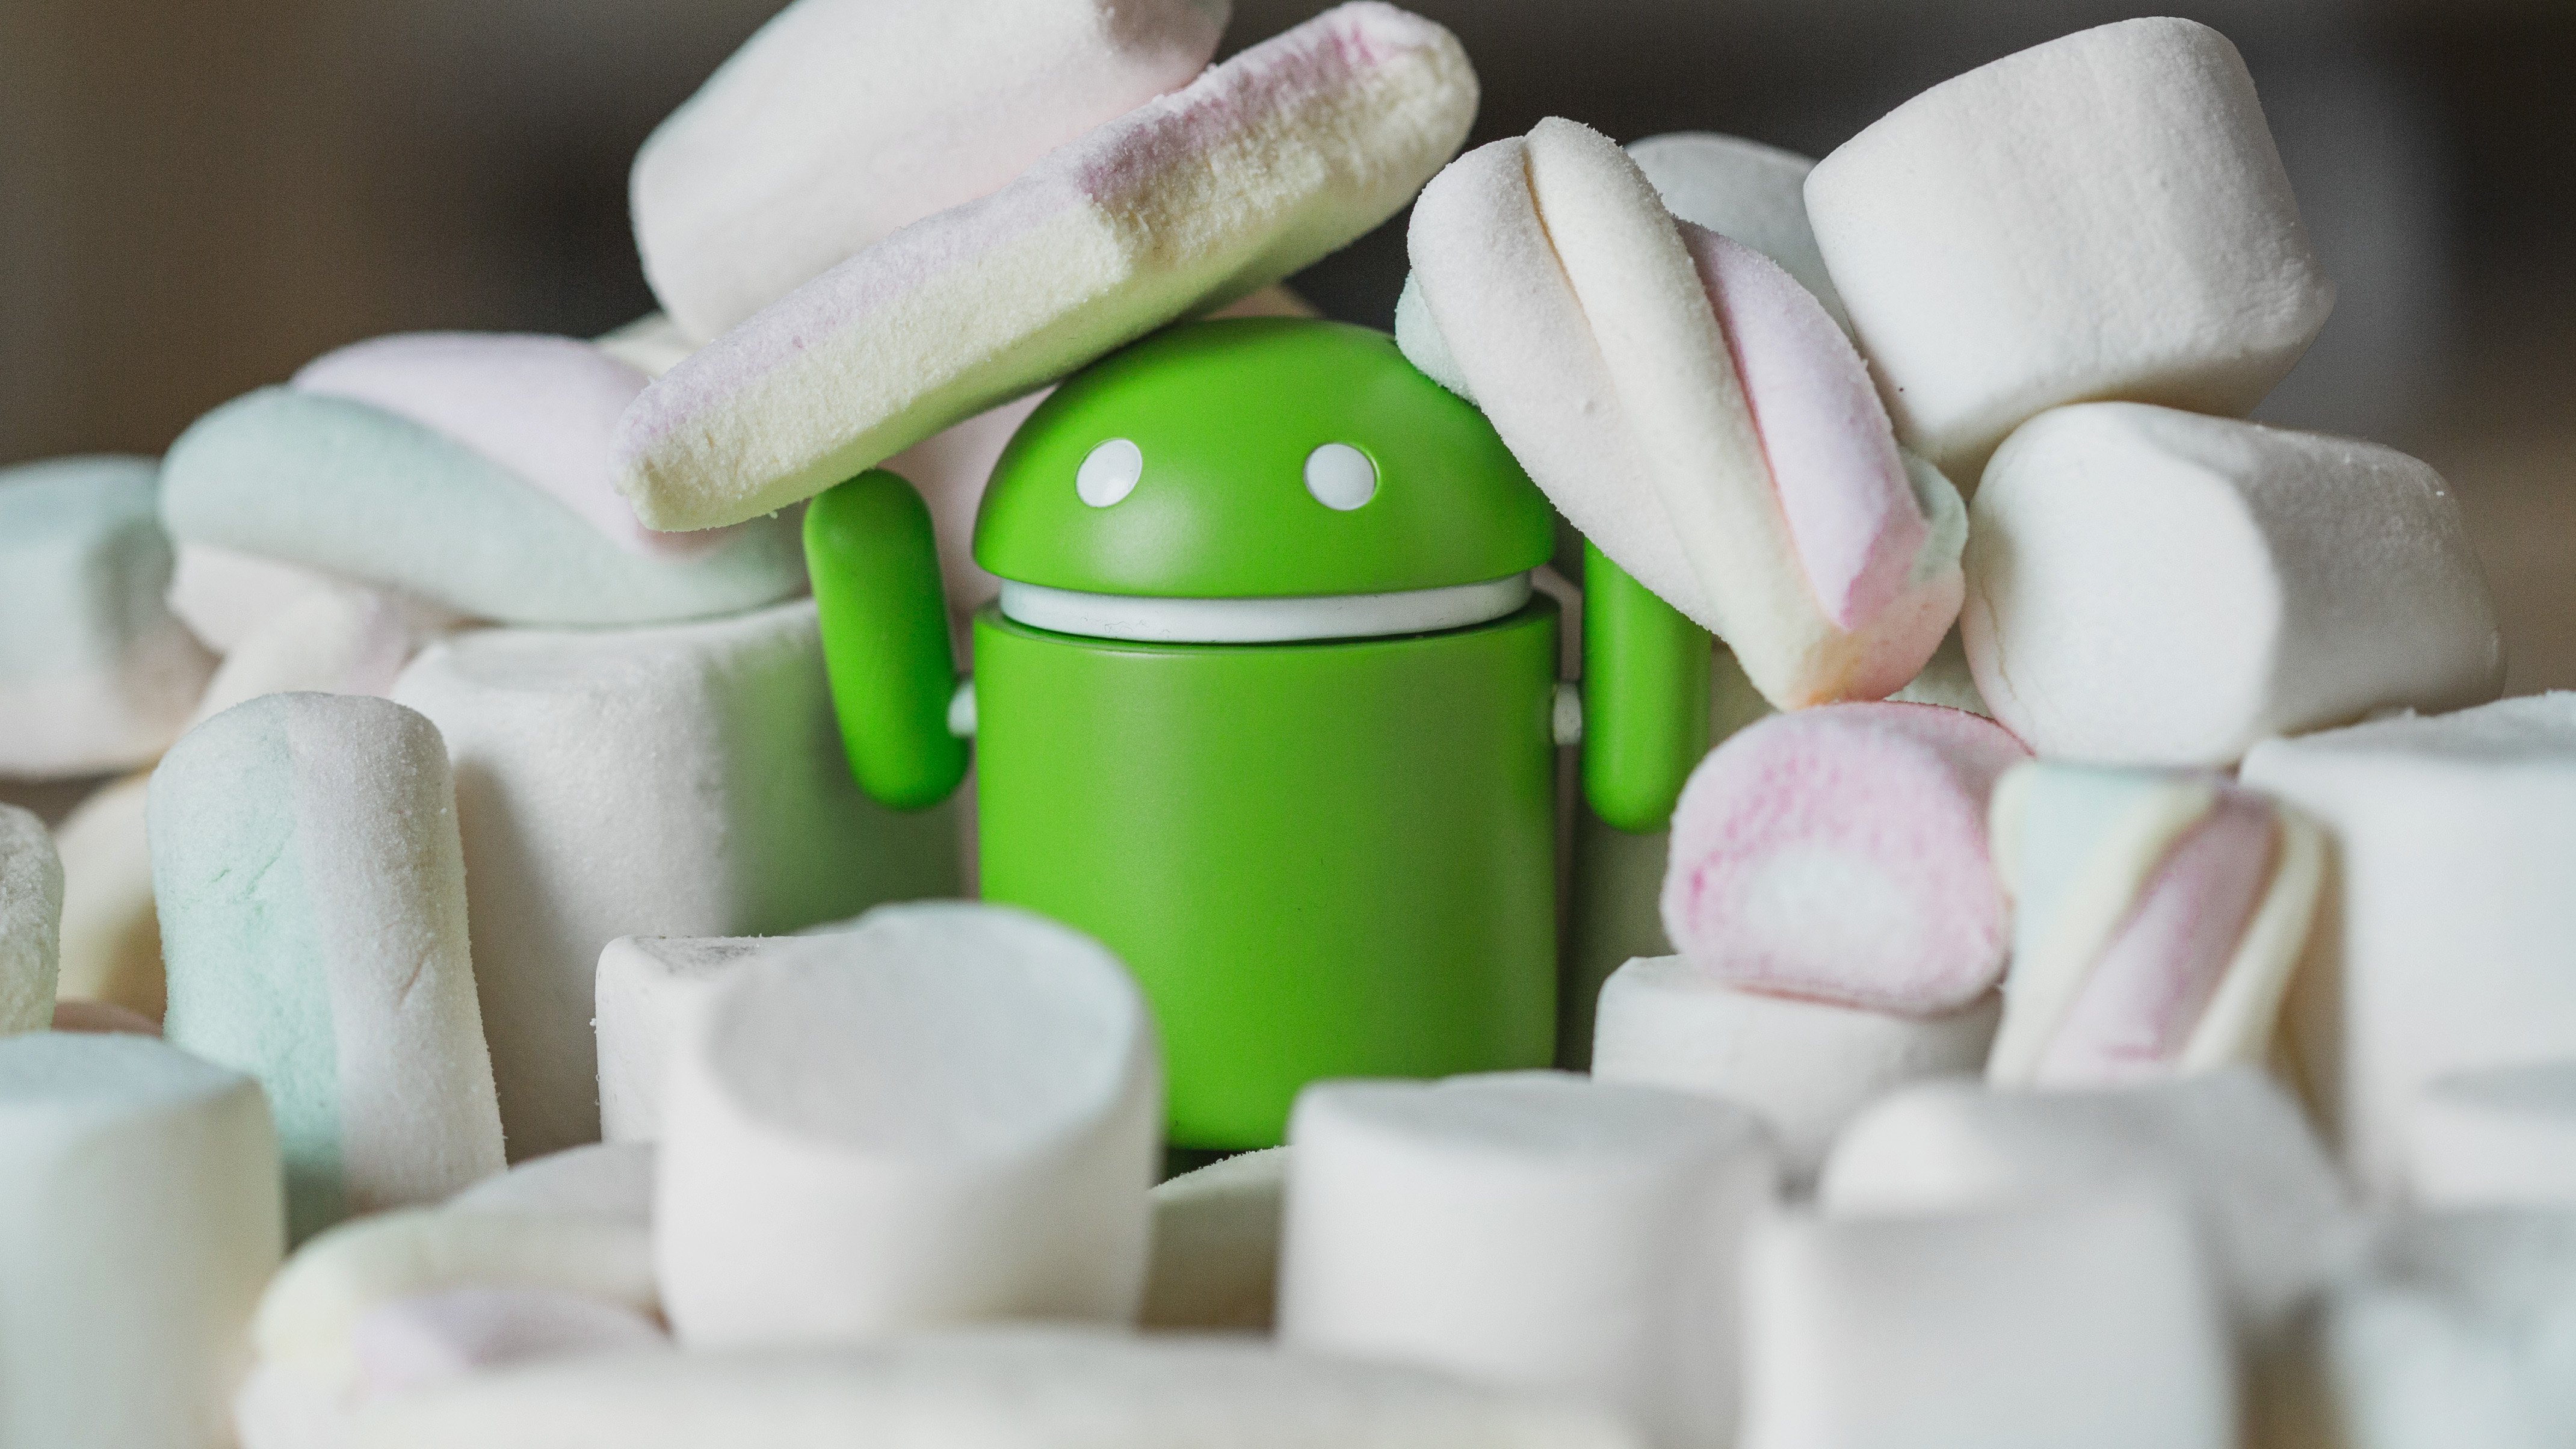 Android Developers Blog: Android 6.0 Marshmallow coming to devices soon